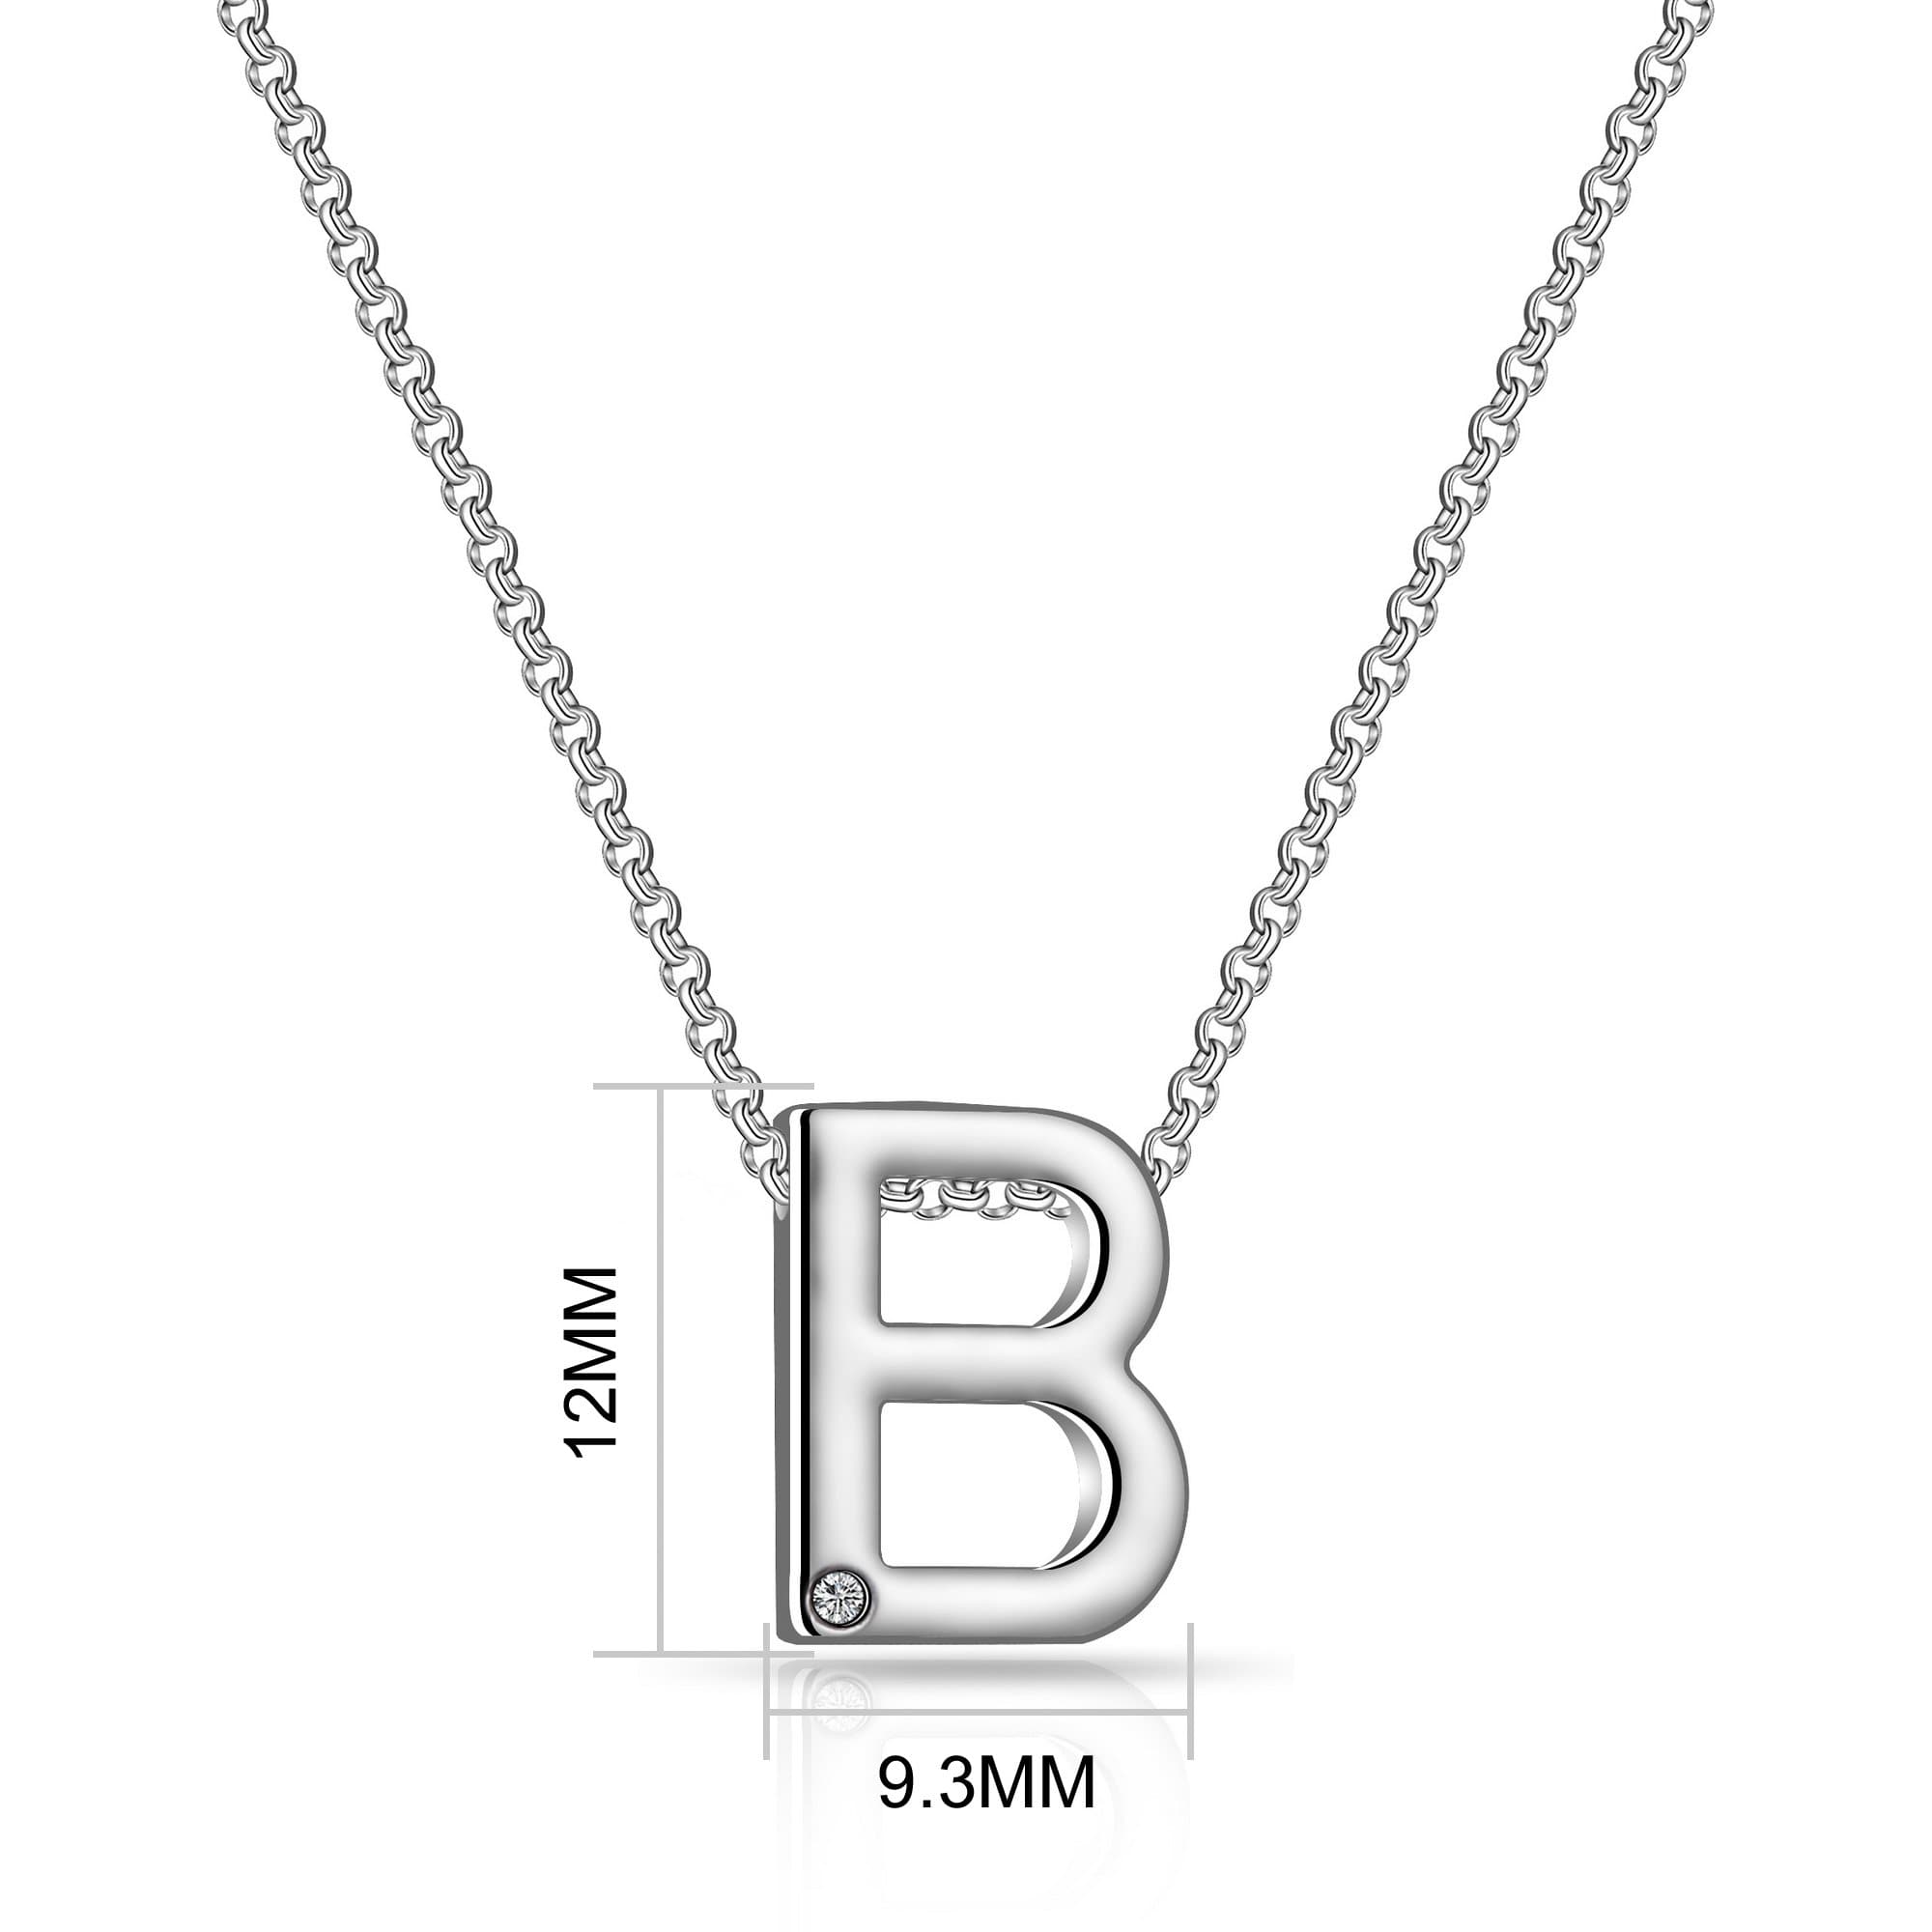 Initial Necklace Letter B Created with Zircondia® Crystals